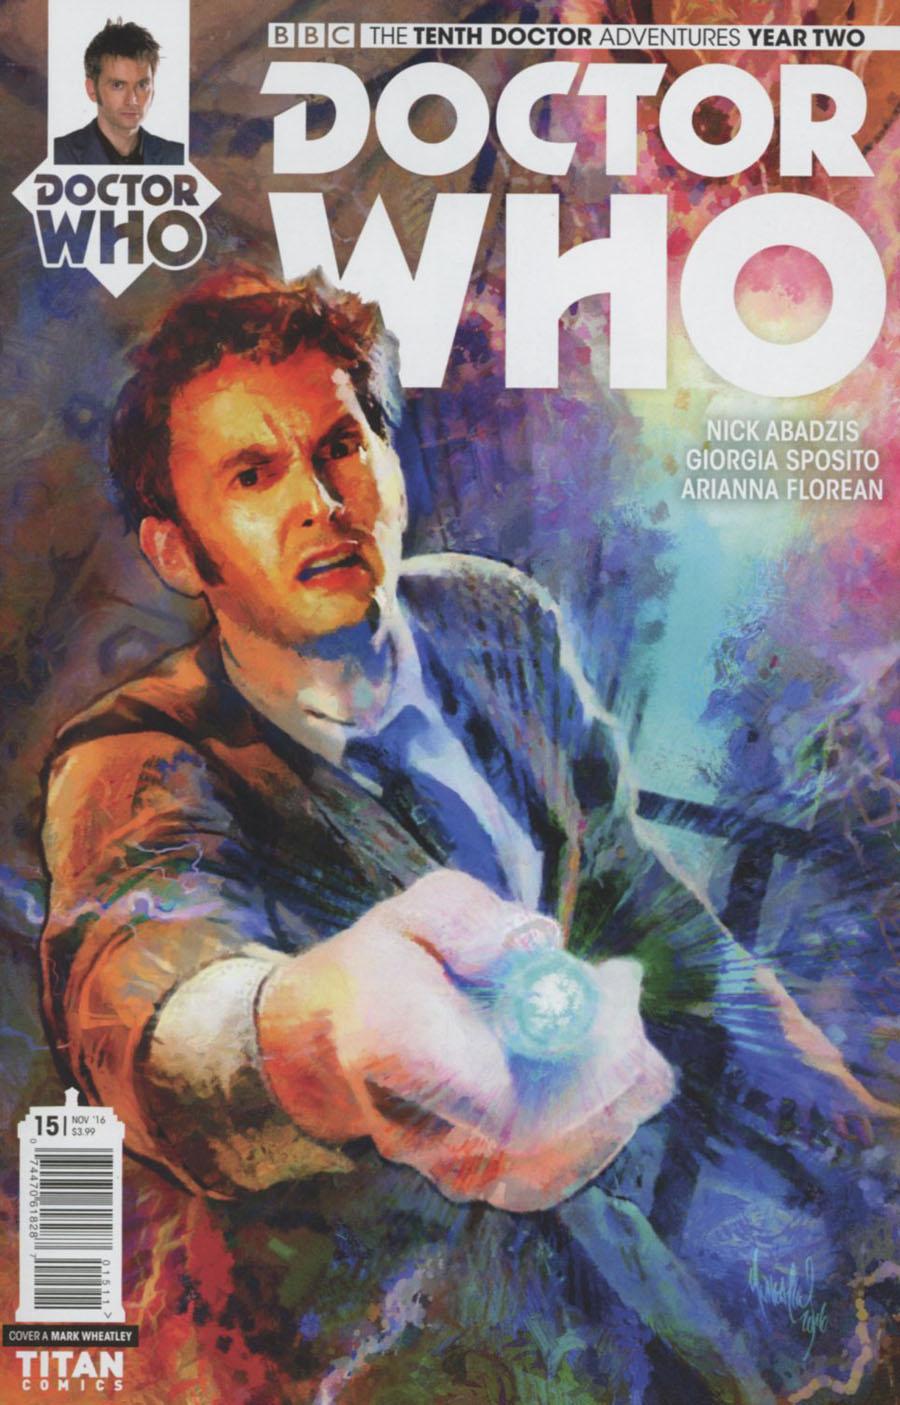 Doctor Who 10th Doctor Year Two Vol. 1 #15